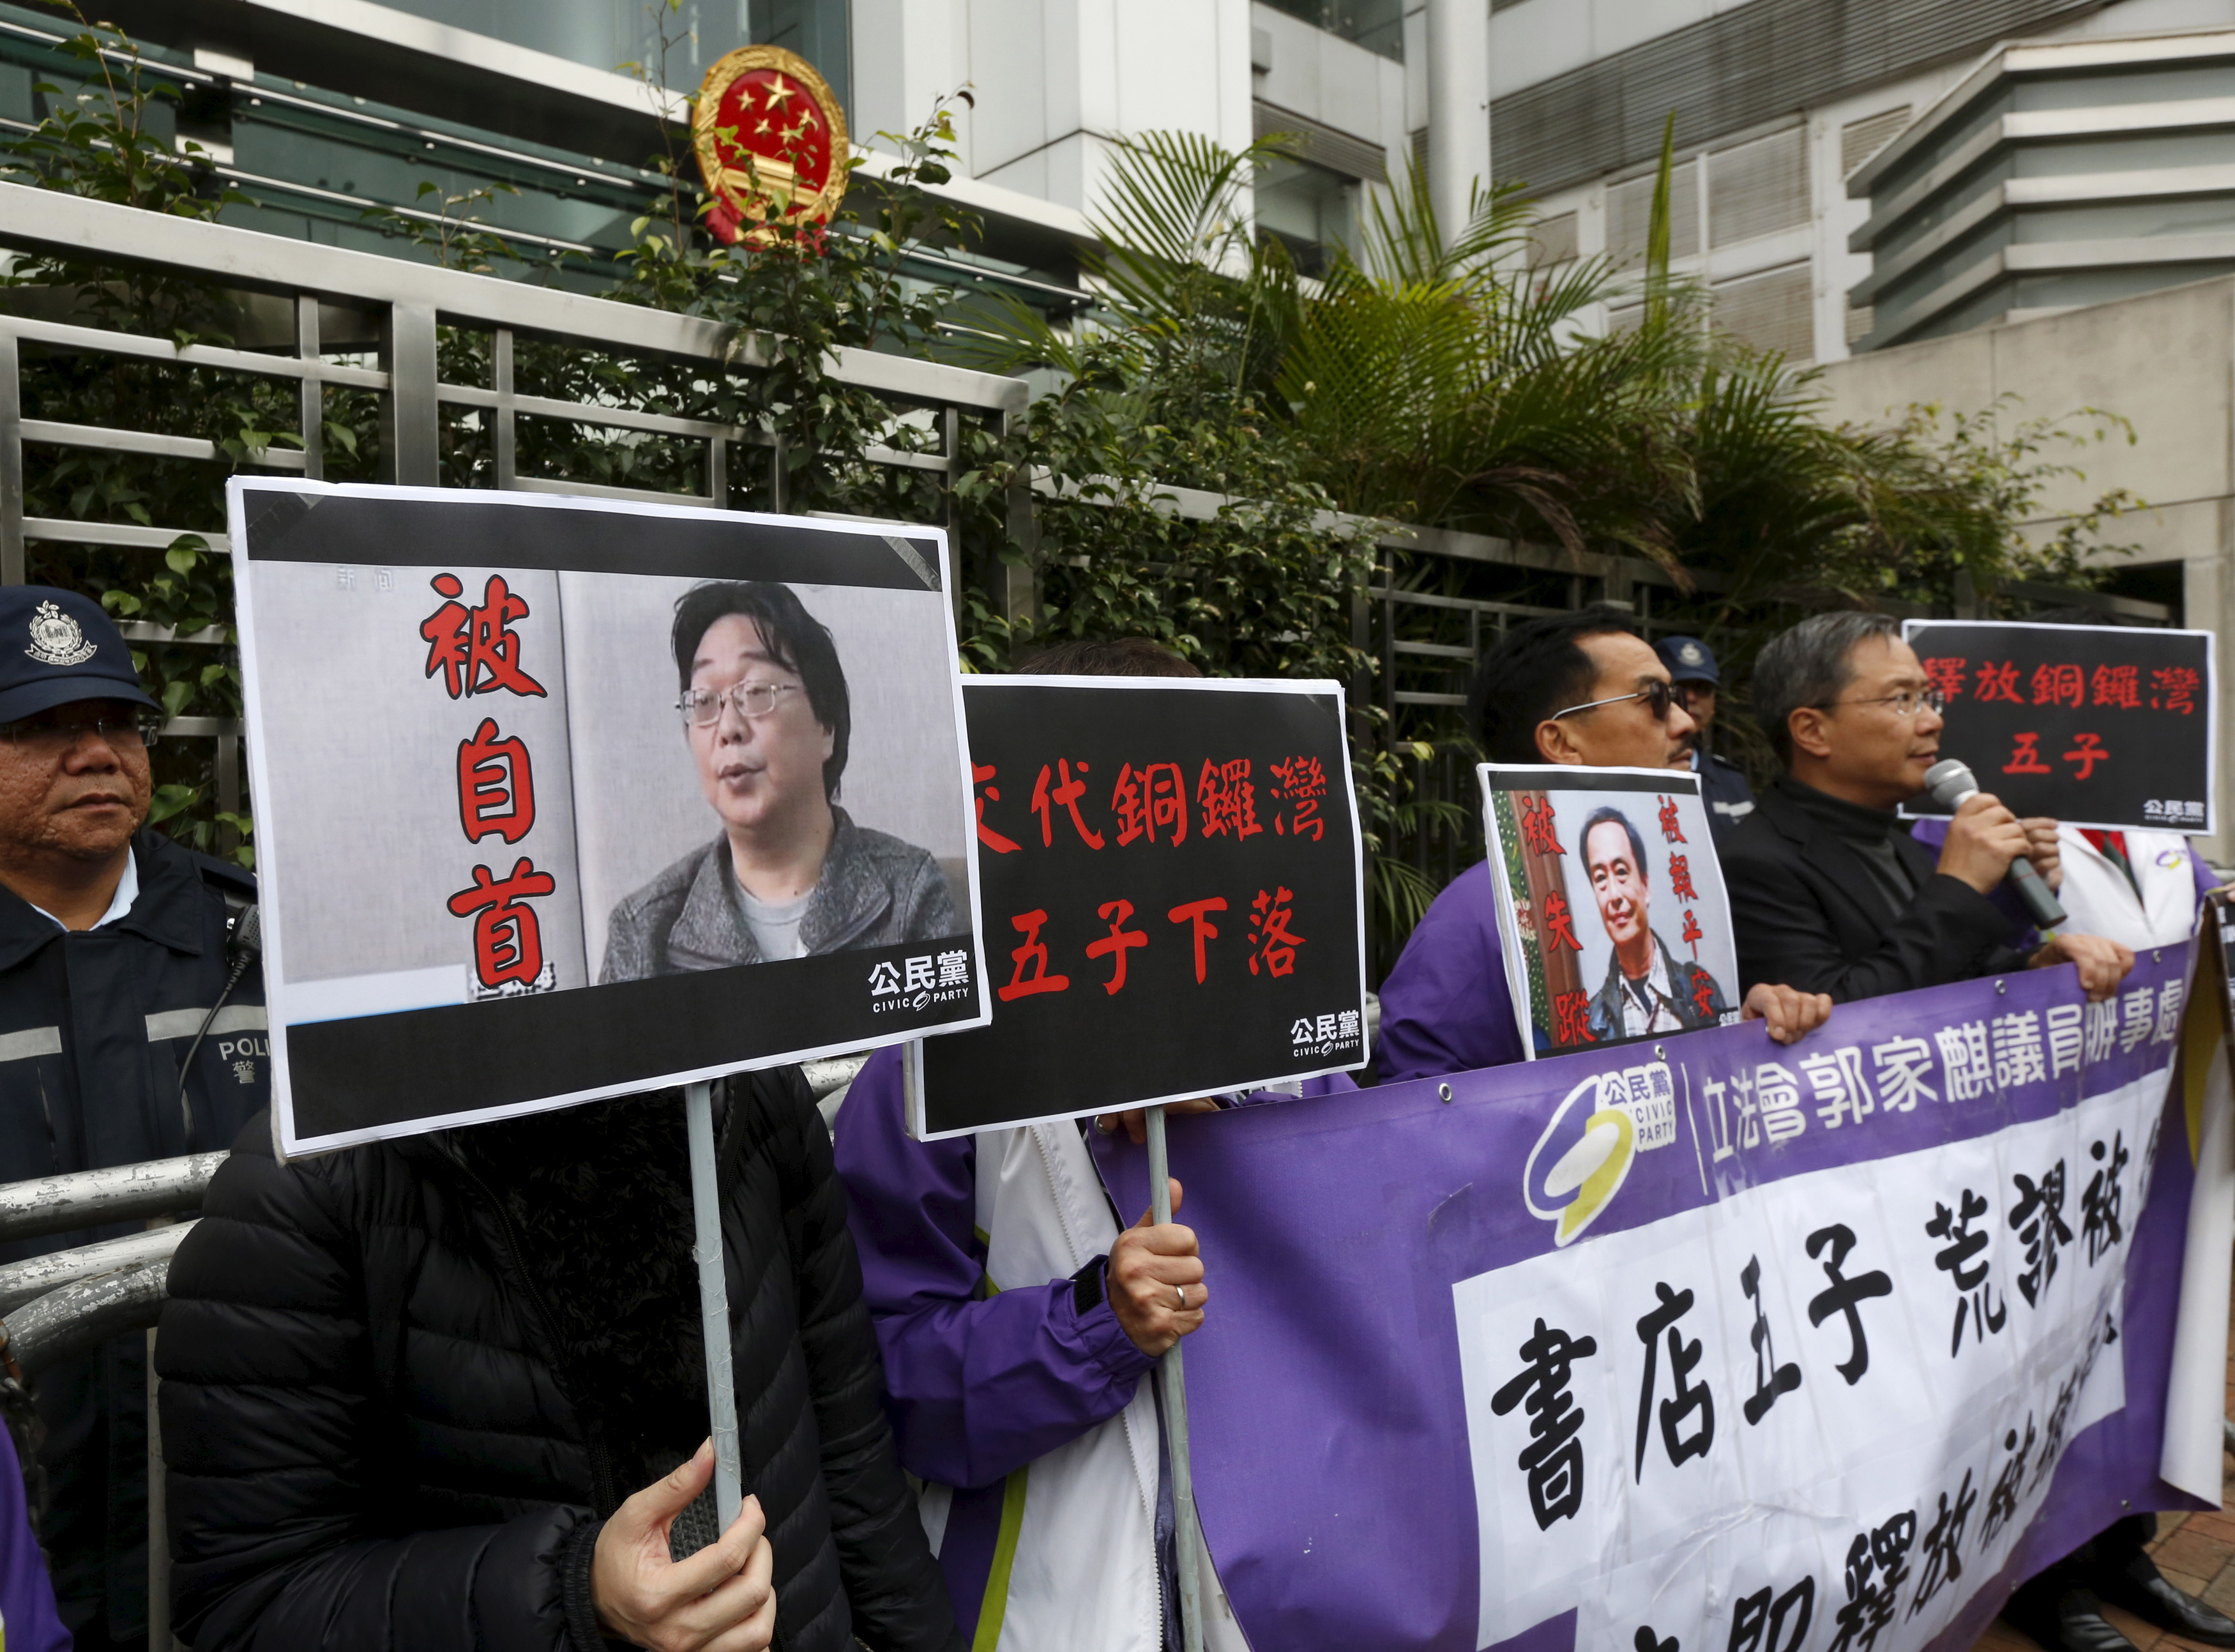 Members from the pro-democracy Civic Party carry a portrait of Gui Minhai and Lee Bo during a protest outside the Chinese Liaison Office in Hong Kong